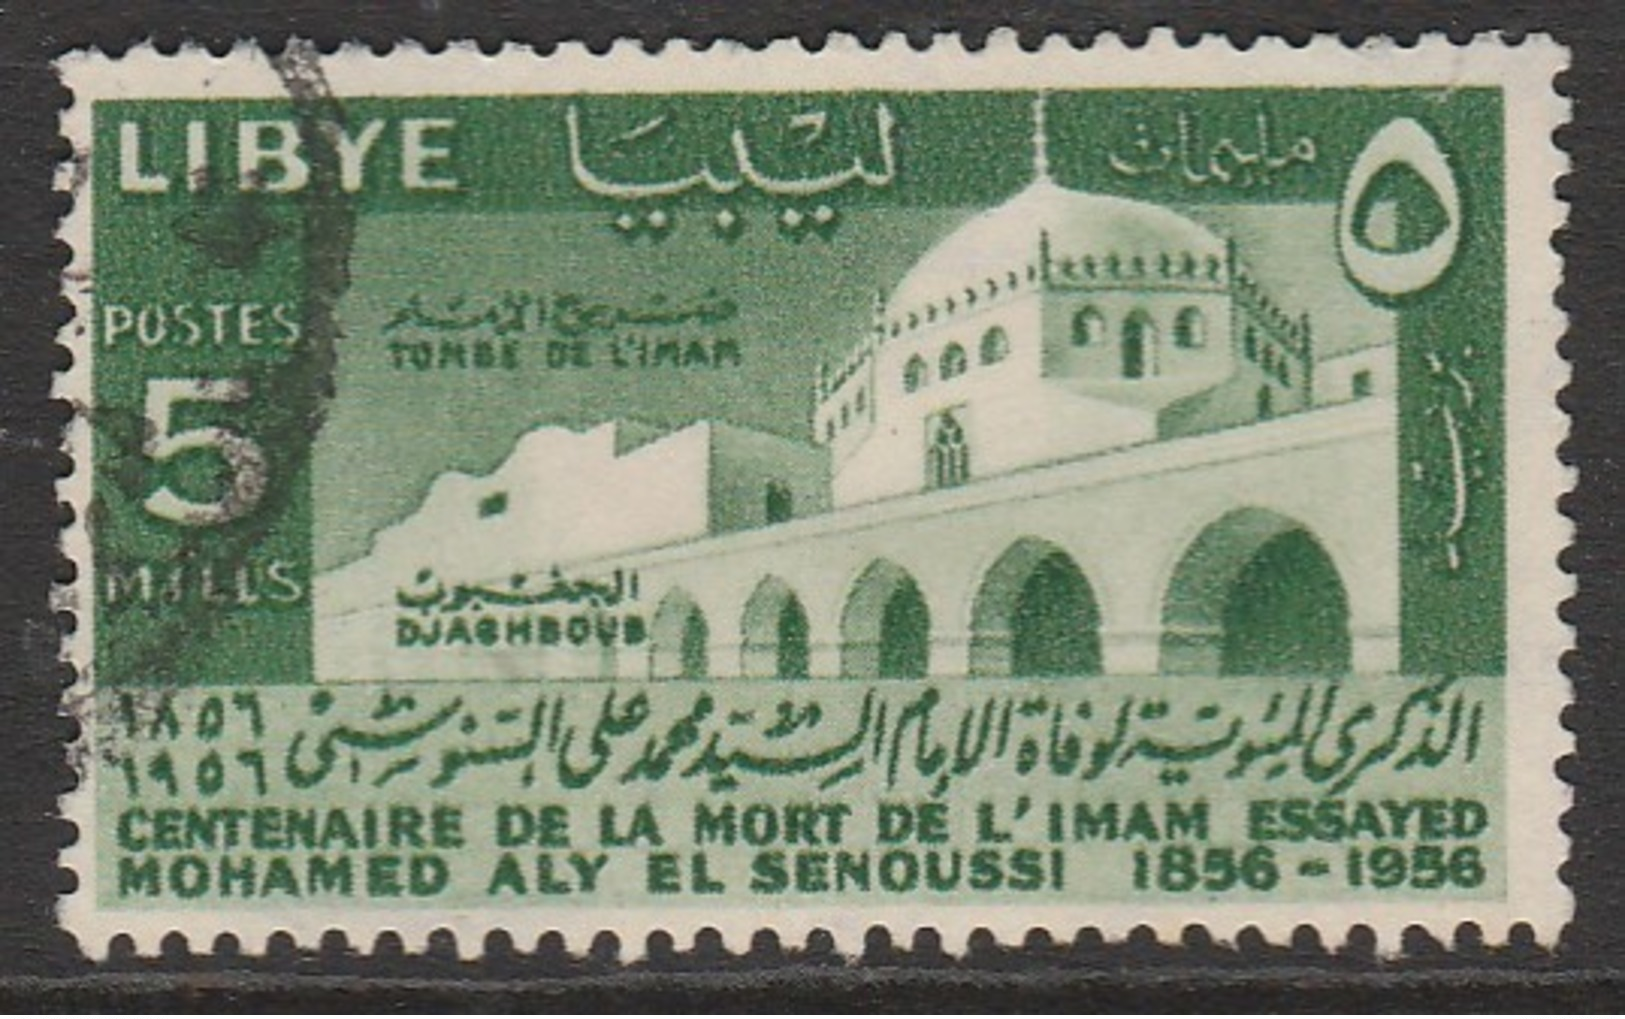 Libya 1956 The 100th Anniversary Of The Death Of Imam Essayed Mohamed Aly El Senussi 5 M Green SW 71 O Used - Libia